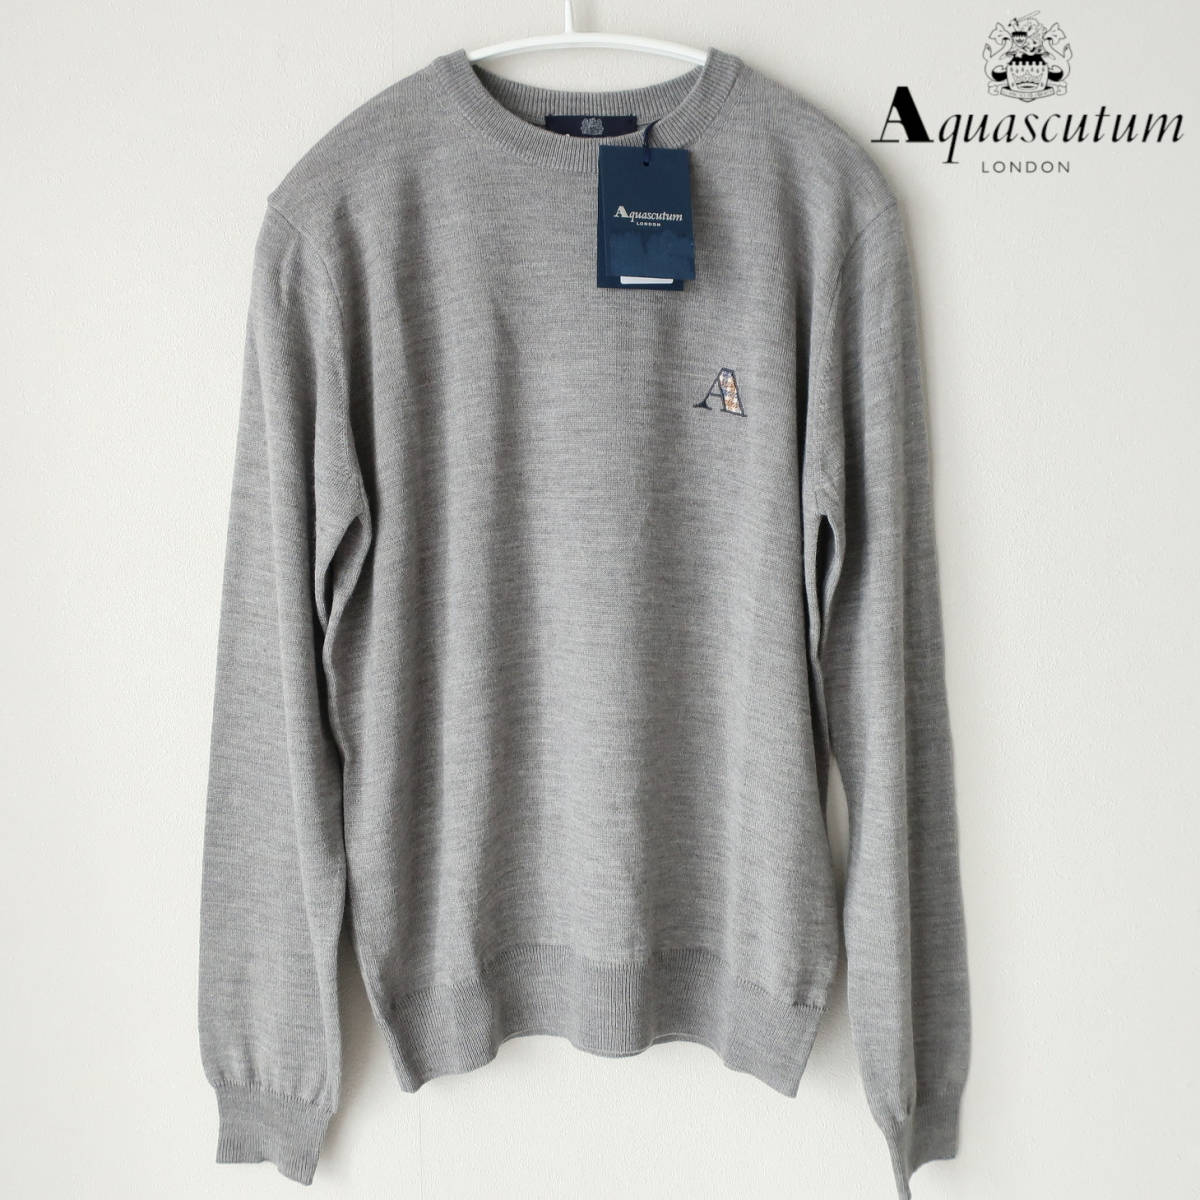  new goods unused tag attaching Aquascutum Aquascutum LONDON Logo high gauge knitted wool sweater ound-necked long sleeve gray men's S size 